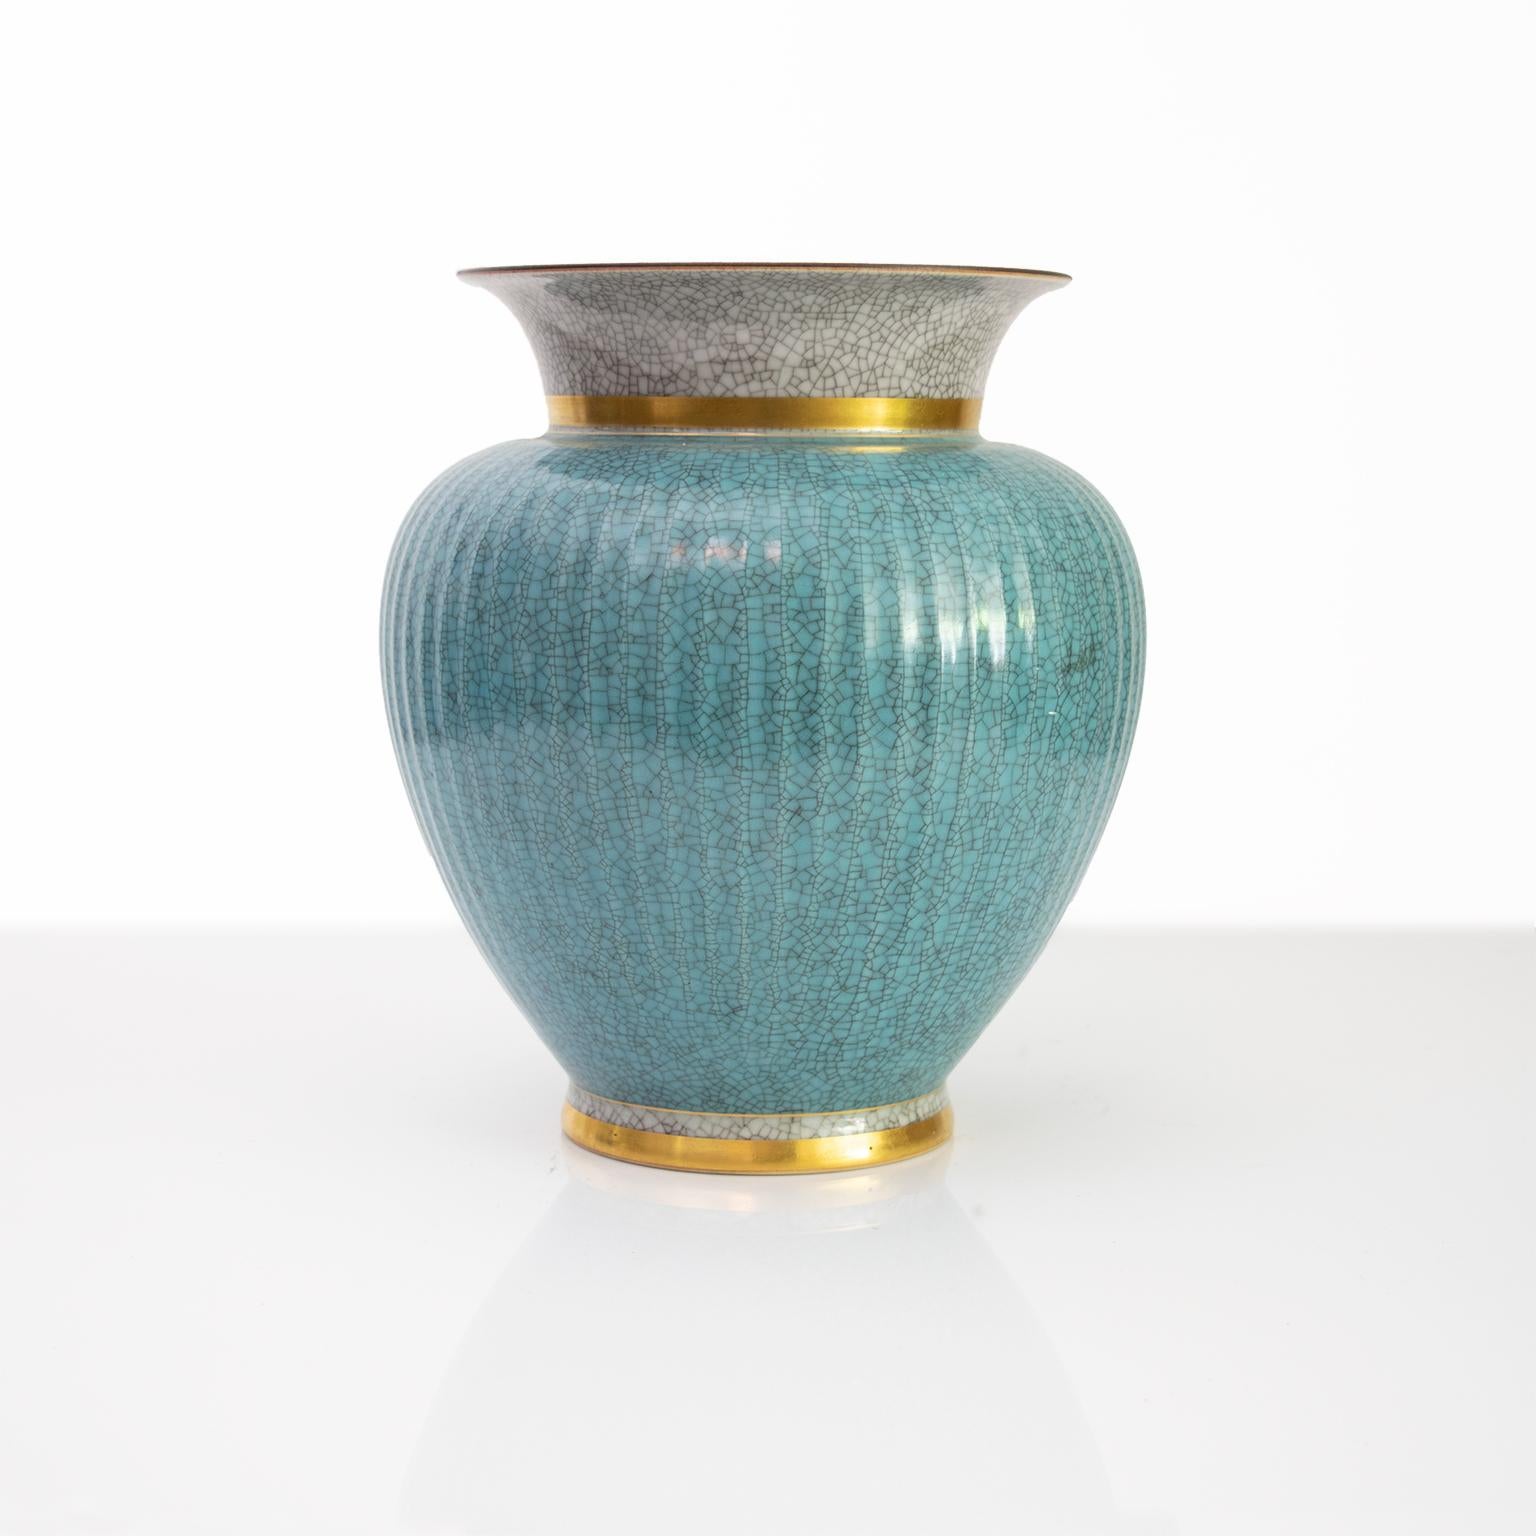 Large Royal Copenhagen ceramic vase in blue and gray (craquelure) crackle glaze and detailed in gold. Made in Denmark, circa 1940s.

Measures: Height 9.5